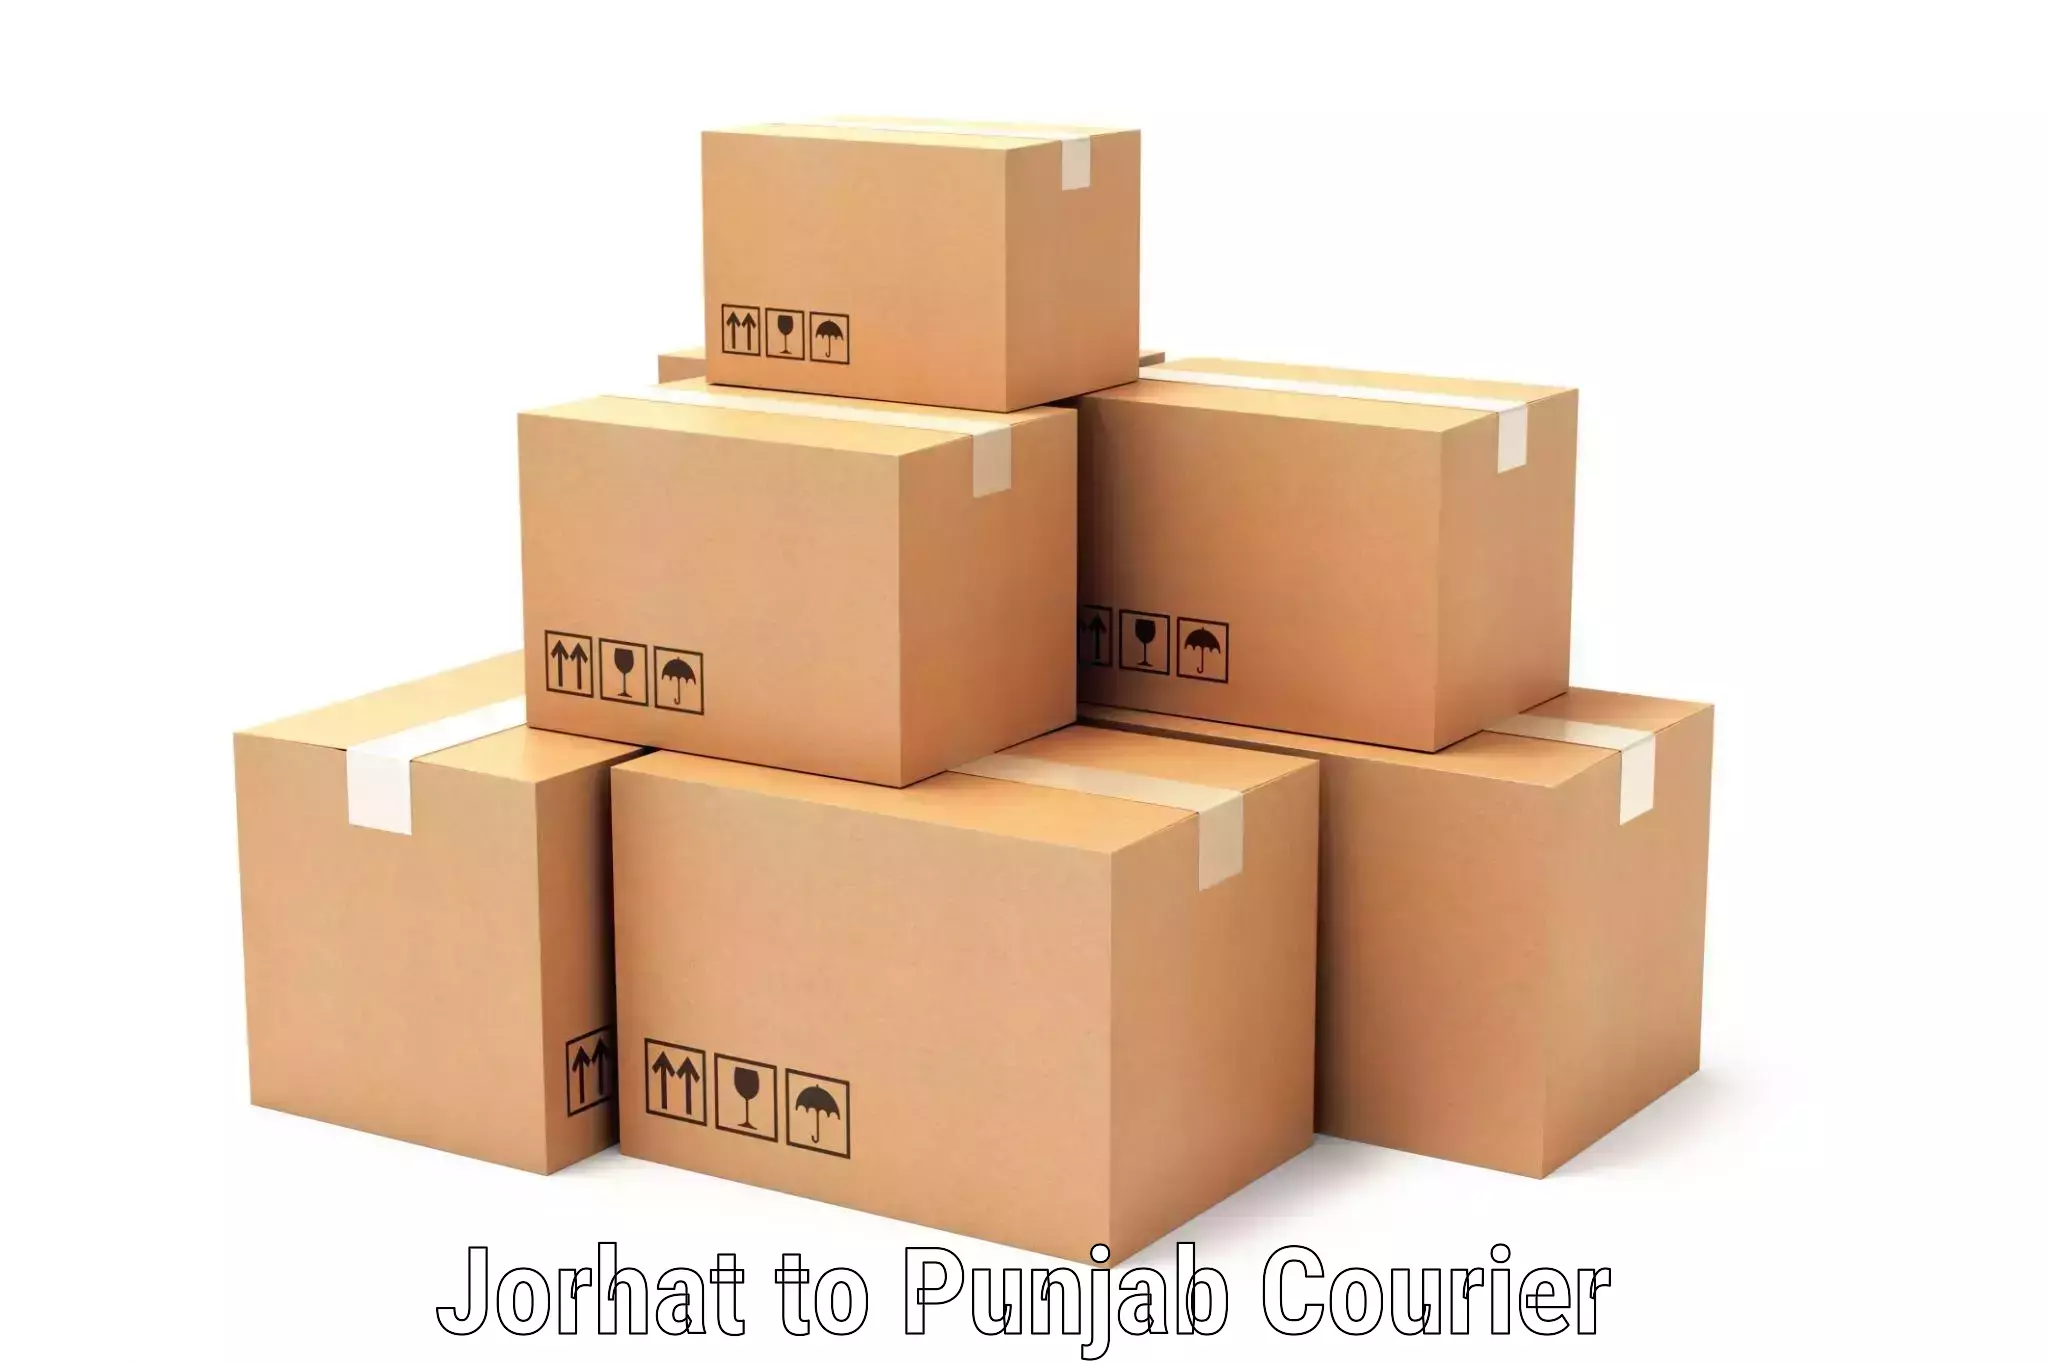 Multi-city courier Jorhat to Jagraon